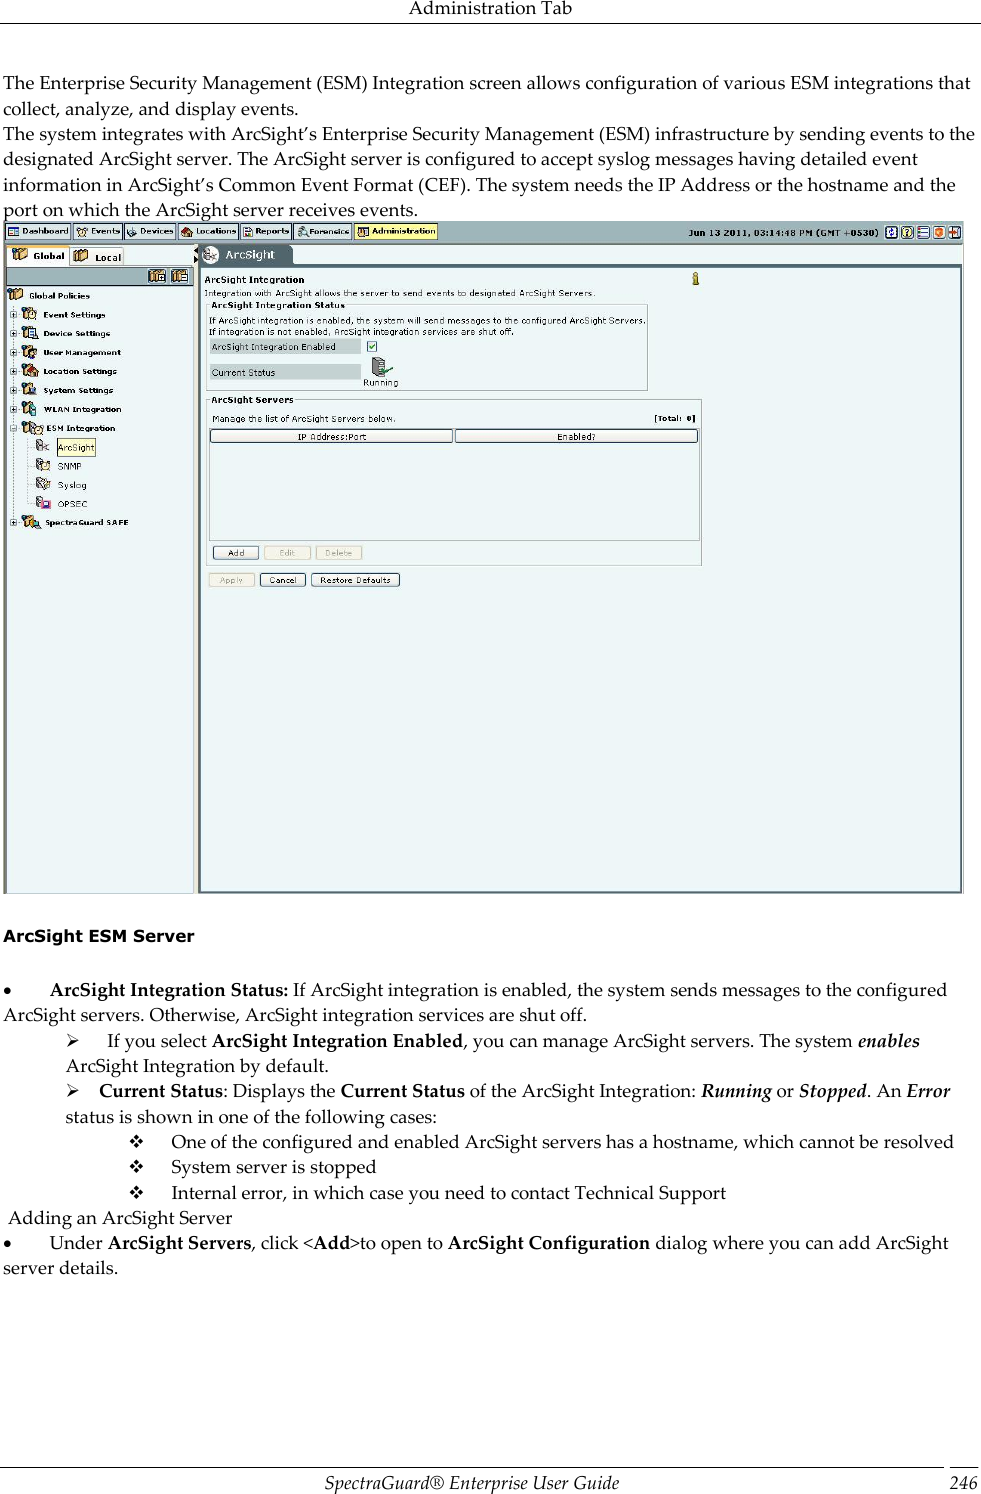 Administration Tab SpectraGuard®  Enterprise User Guide 246 The Enterprise Security Management (ESM) Integration screen allows configuration of various ESM integrations that collect, analyze, and display events. The system integrates with ArcSight’s Enterprise Security Management (ESM) infrastructure by sending events to the designated ArcSight server. The ArcSight server is configured to accept syslog messages having detailed event information in ArcSight’s Common Event Format (CEF). The system needs the IP Address or the hostname and the port on which the ArcSight server receives events.    ArcSight ESM Server             ArcSight Integration Status: If ArcSight integration is enabled, the system sends messages to the configured ArcSight servers. Otherwise, ArcSight integration services are shut off.        If you select ArcSight Integration Enabled, you can manage ArcSight servers. The system enables ArcSight Integration by default.      Current Status: Displays the Current Status of the ArcSight Integration: Running or Stopped. An Error status is shown in one of the following cases:        One of the configured and enabled ArcSight servers has a hostname, which cannot be resolved        System server is stopped        Internal error, in which case you need to contact Technical Support  Adding an ArcSight Server           Under ArcSight Servers, click &lt;Add&gt;to open to ArcSight Configuration dialog where you can add ArcSight server details. 